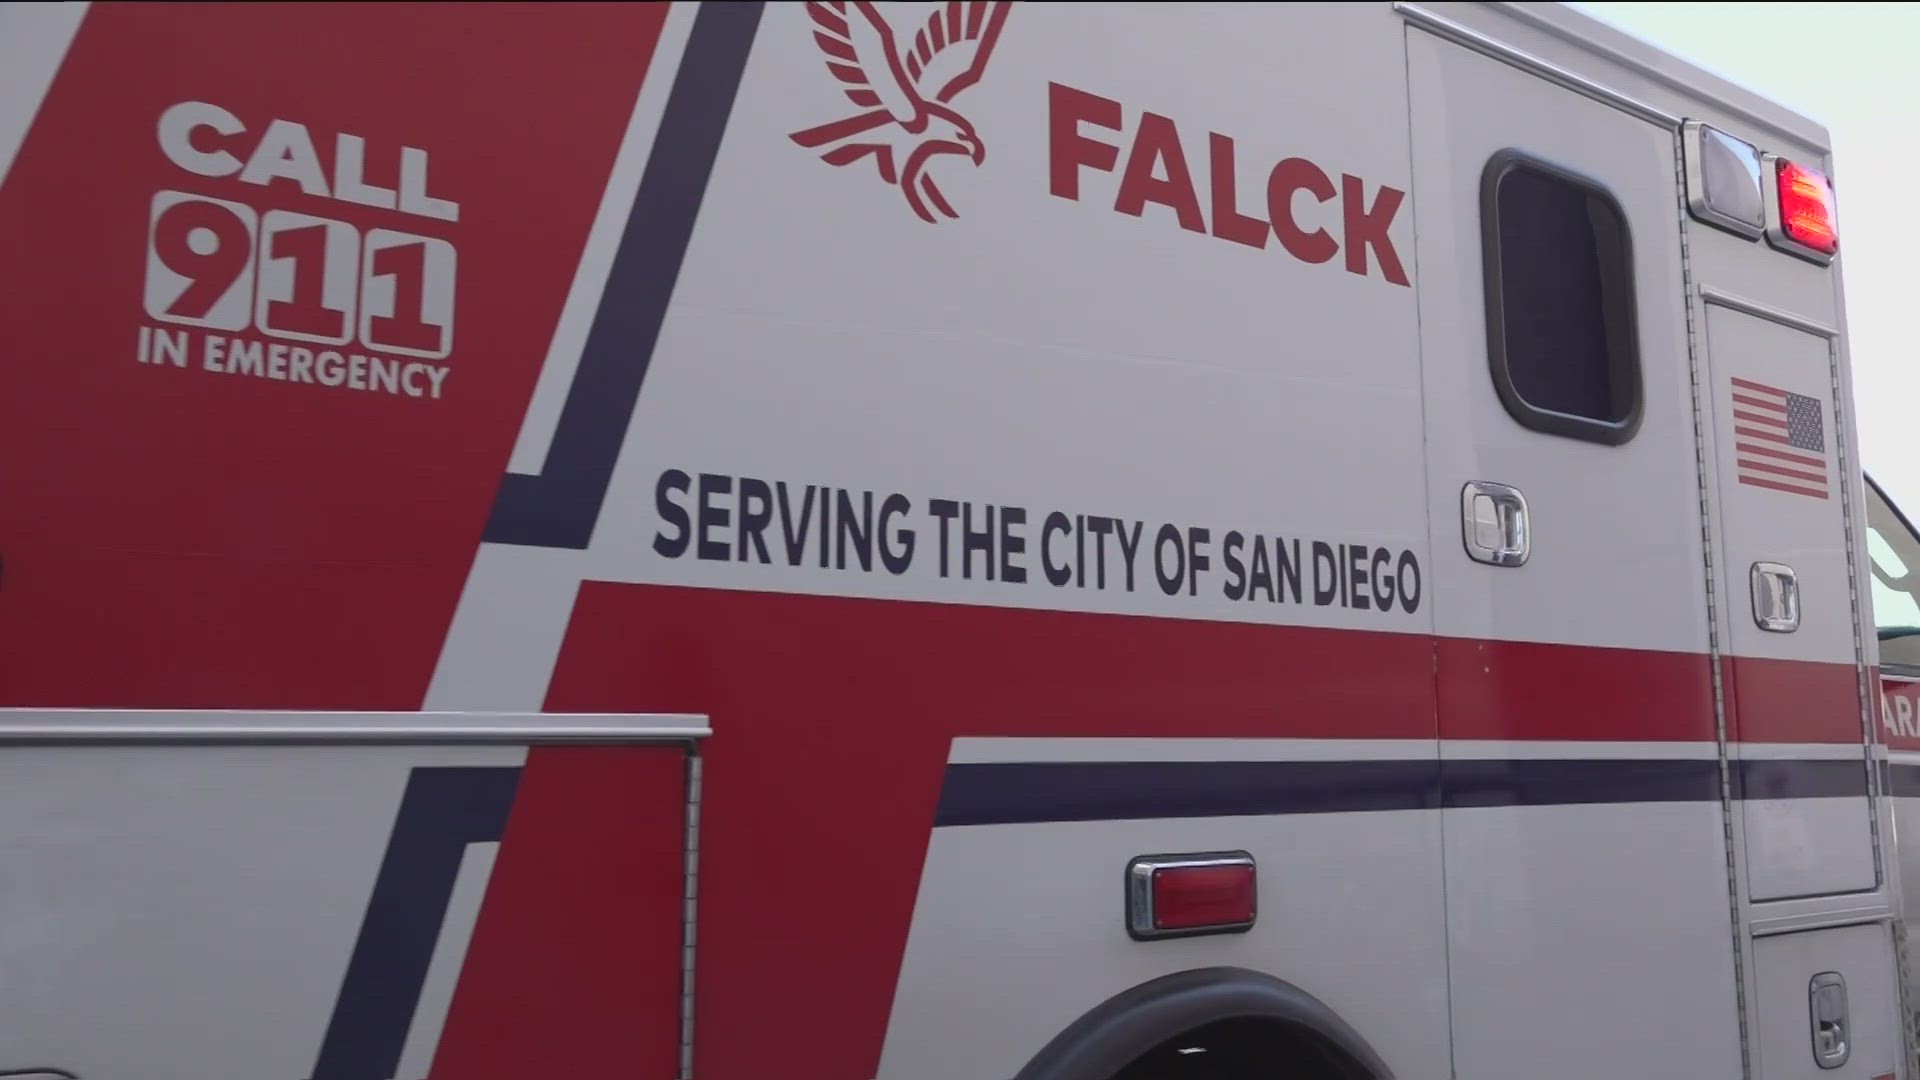 CBS 8 rode alongside crews as they responded to calls in a behind-the-scenes look at what it takes to save lives.